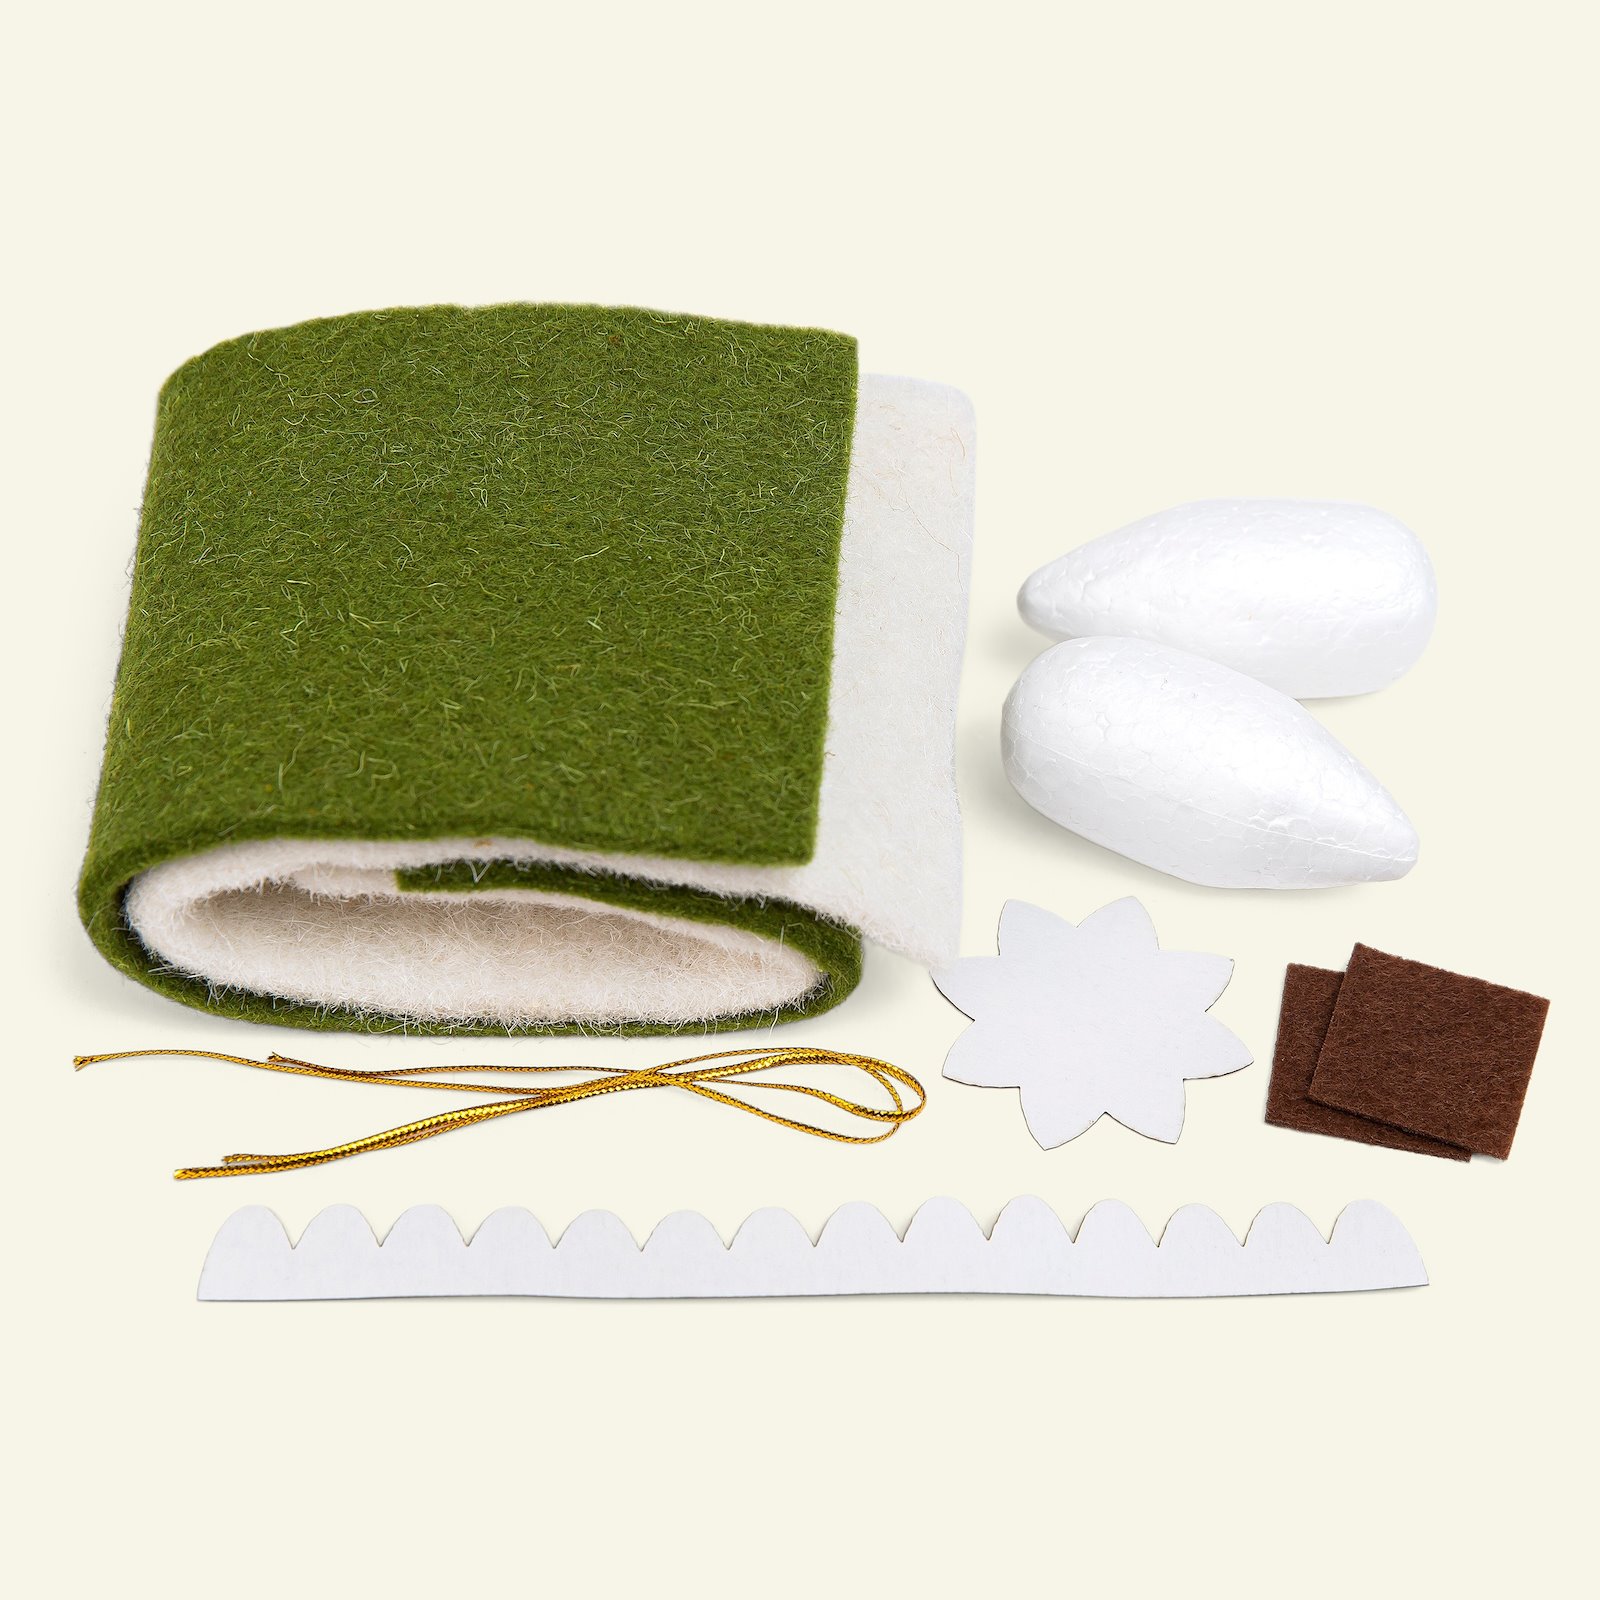 Kit wool cones 10cm green/offwhite 2pcs 93780_pack_b